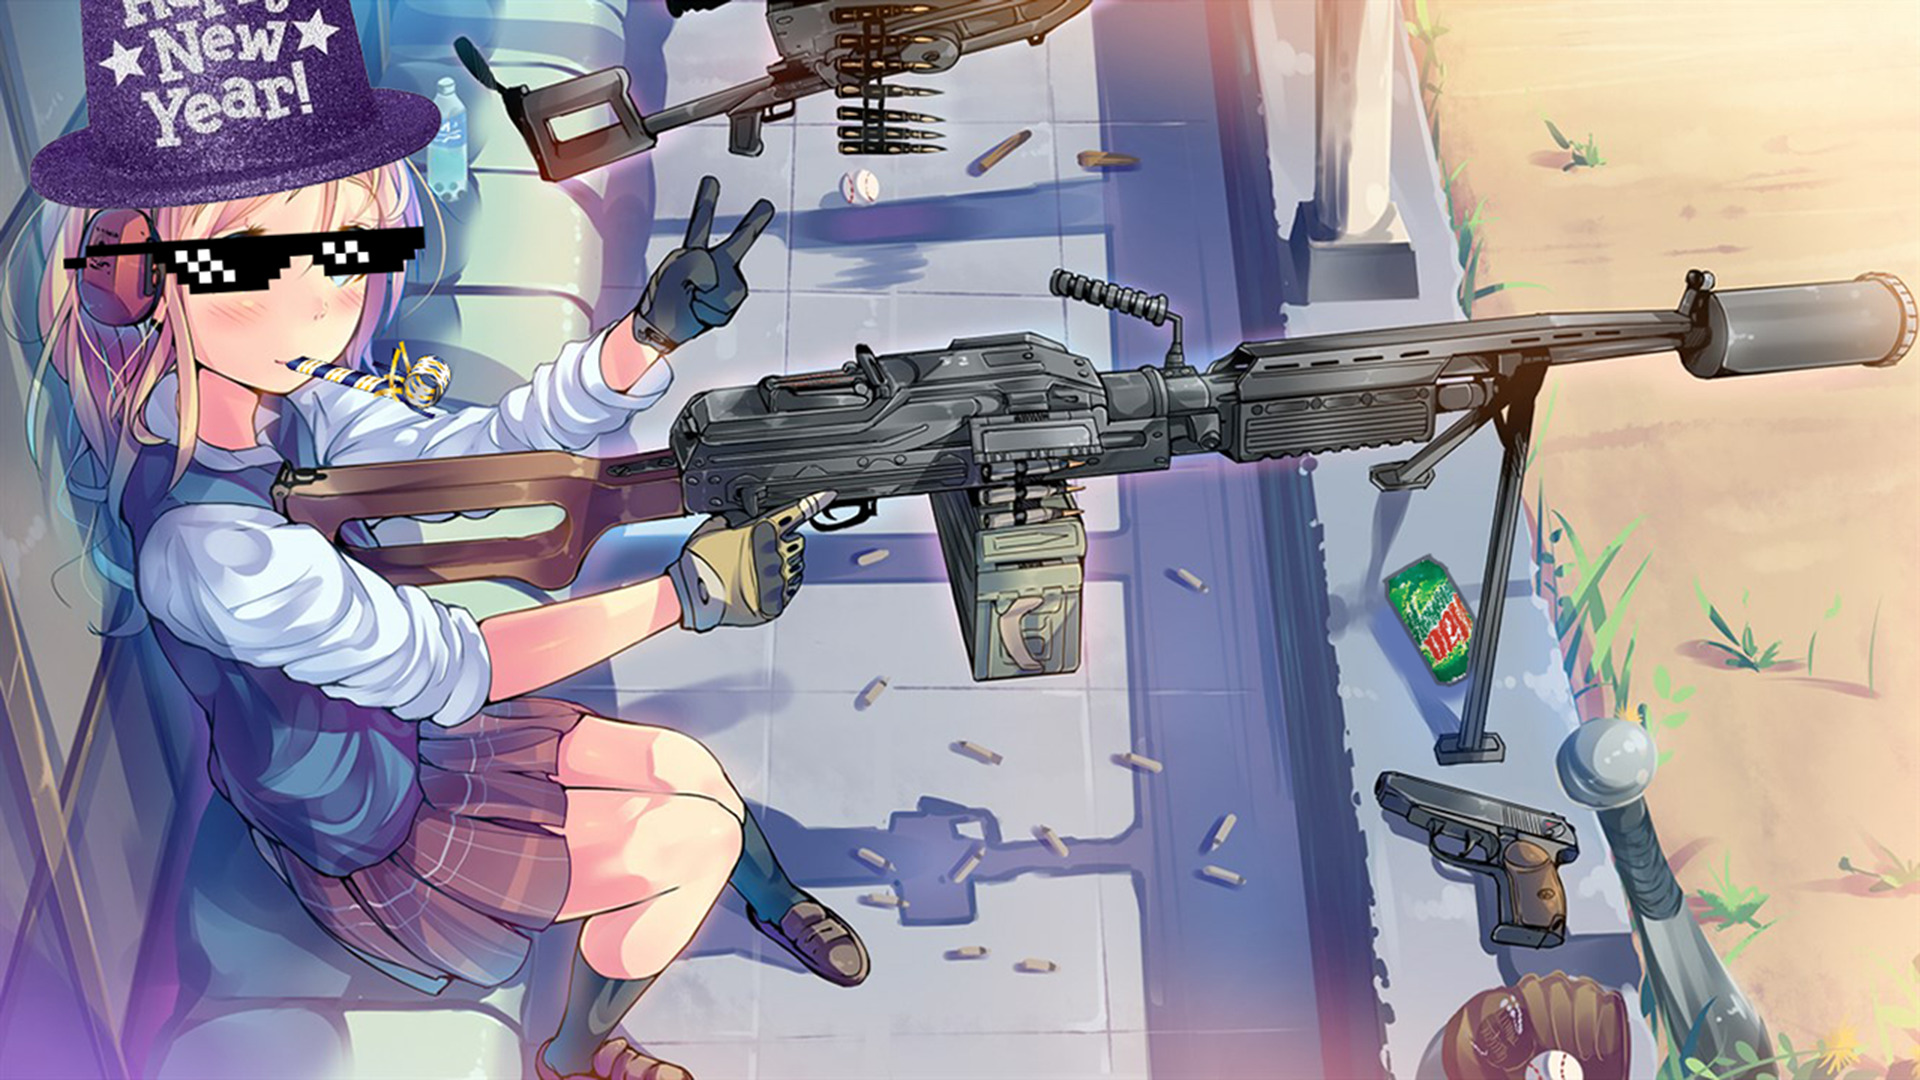 New Year, Weapon, Skirt, Major League Gaming, Mountain Dew, Sunglasses Wallpaper